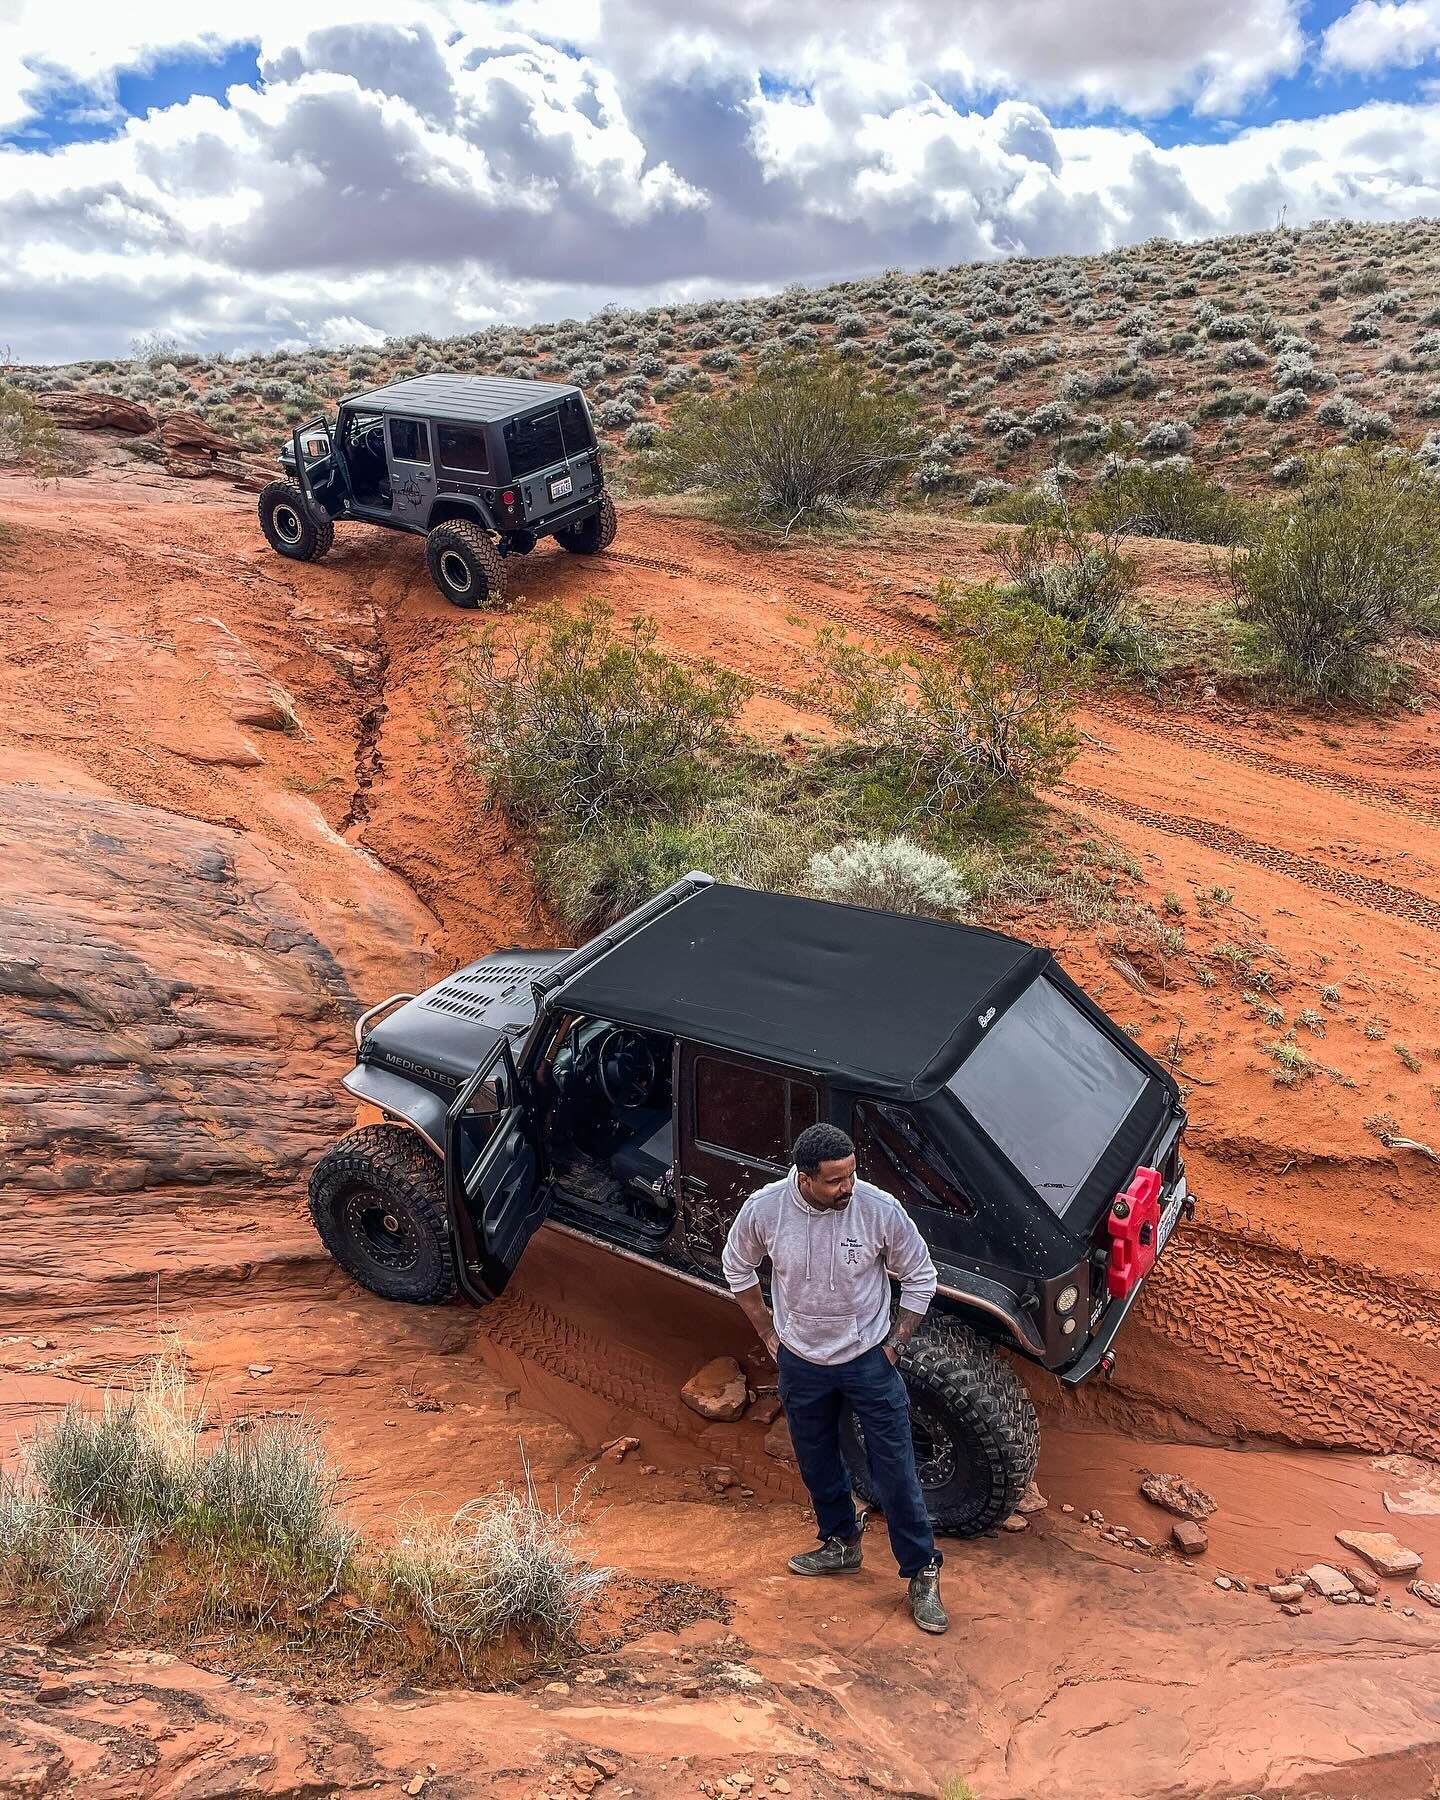 That laid back, checking out the scenery vibe. We are in Sand Hollow this week wheelin'... what you doin? 

Like &bull; Follow &bull; Comment &bull; Tag Us 
&bull;
@harsh_customs 
@olyjk 

&bull;
#buggythings #trailhero2023 #pitcrew #nitto #rockcrawl